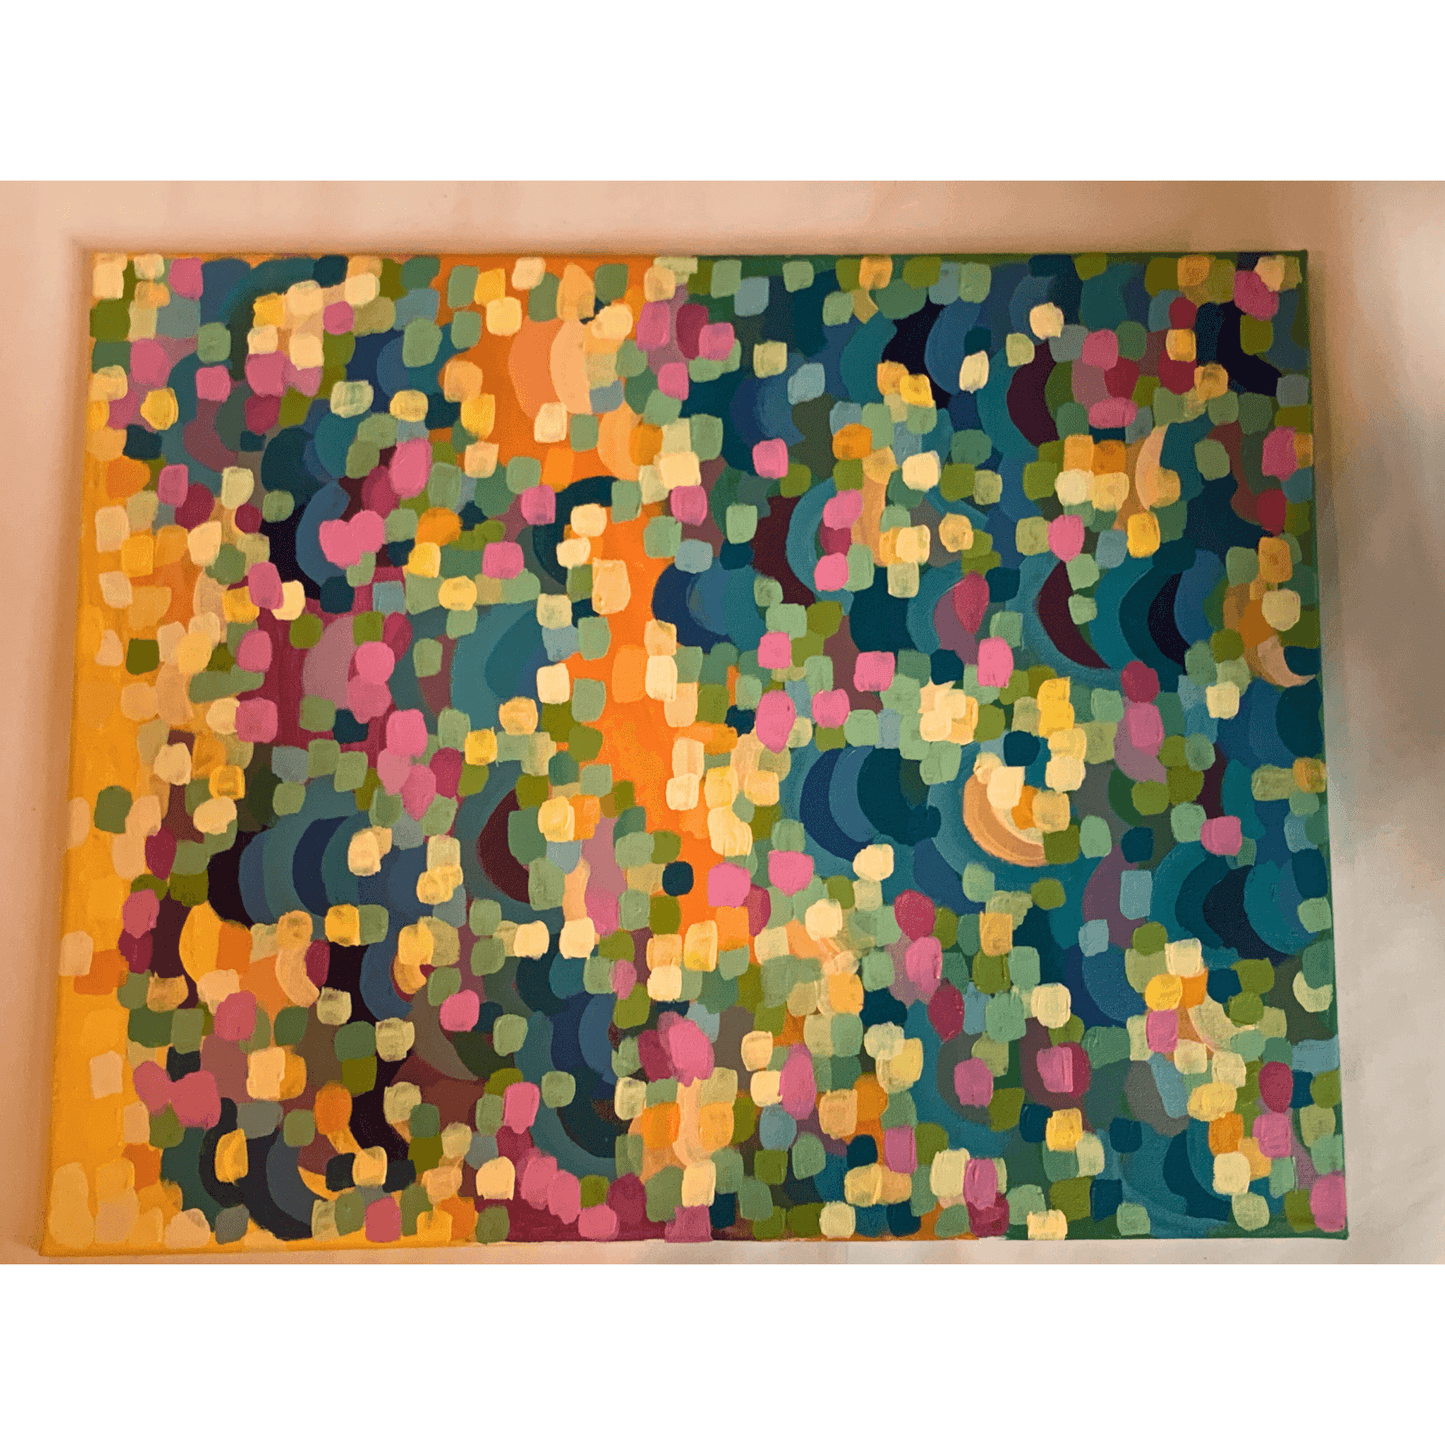 SHINY HAPPY PEOPLE Abstract Acrylic Painting on 16x20x0.5 inch canvas